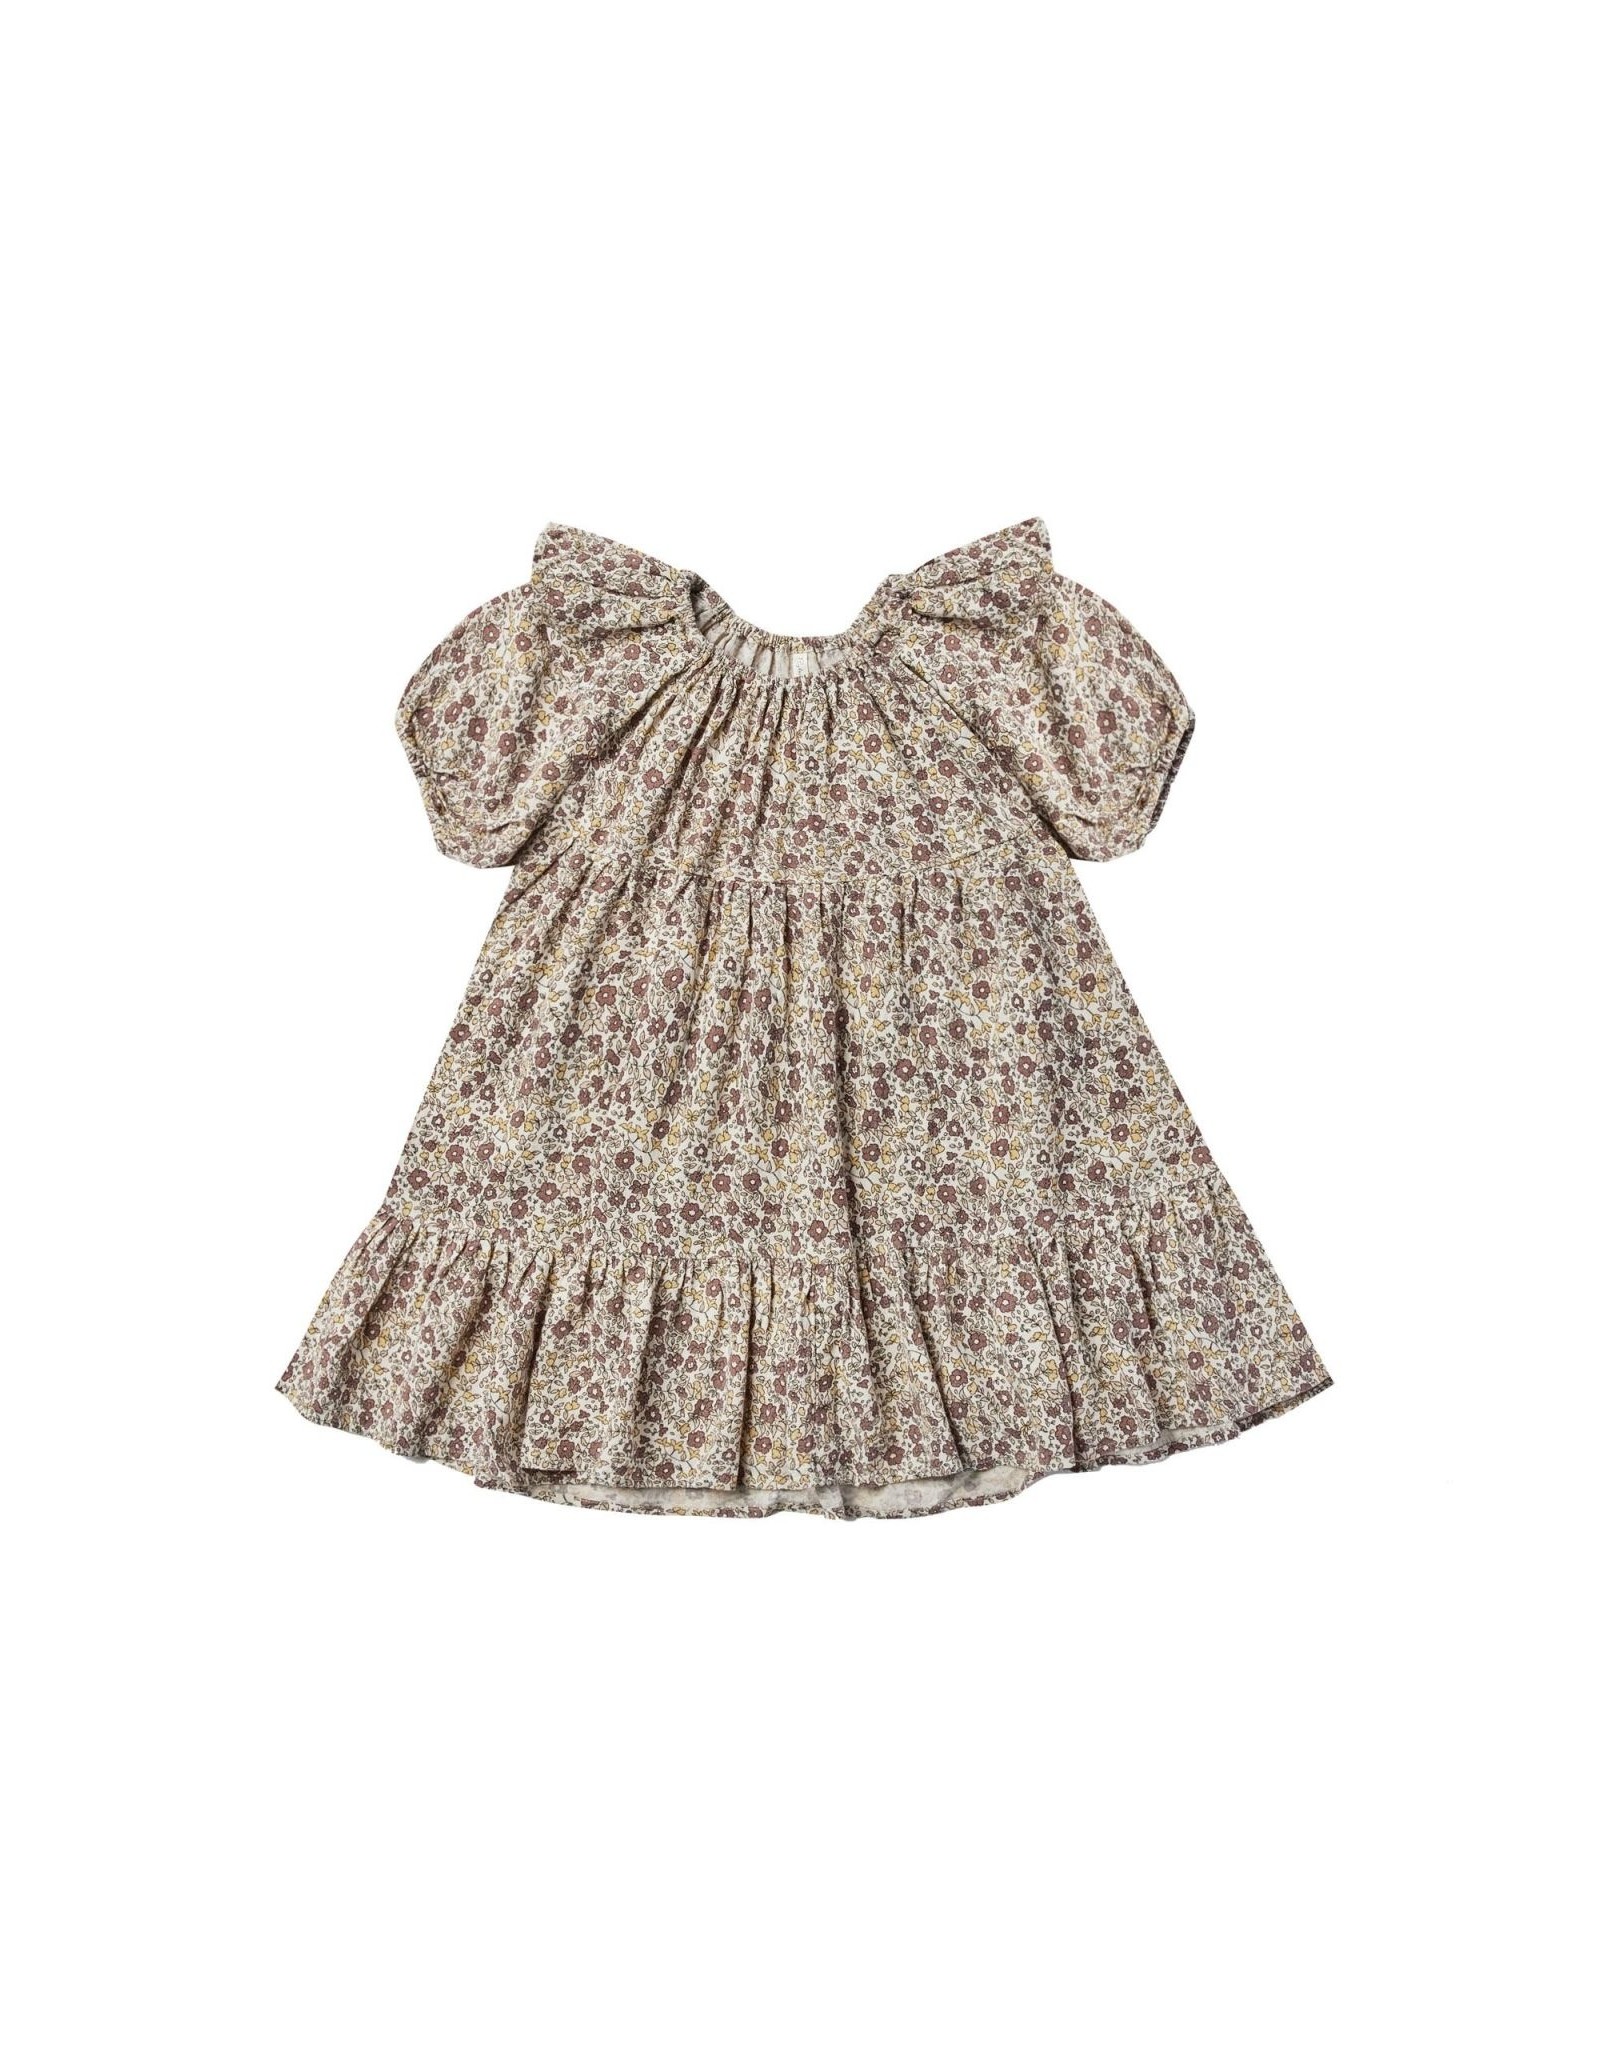 Rylee and Cru willow dress- autumn floral